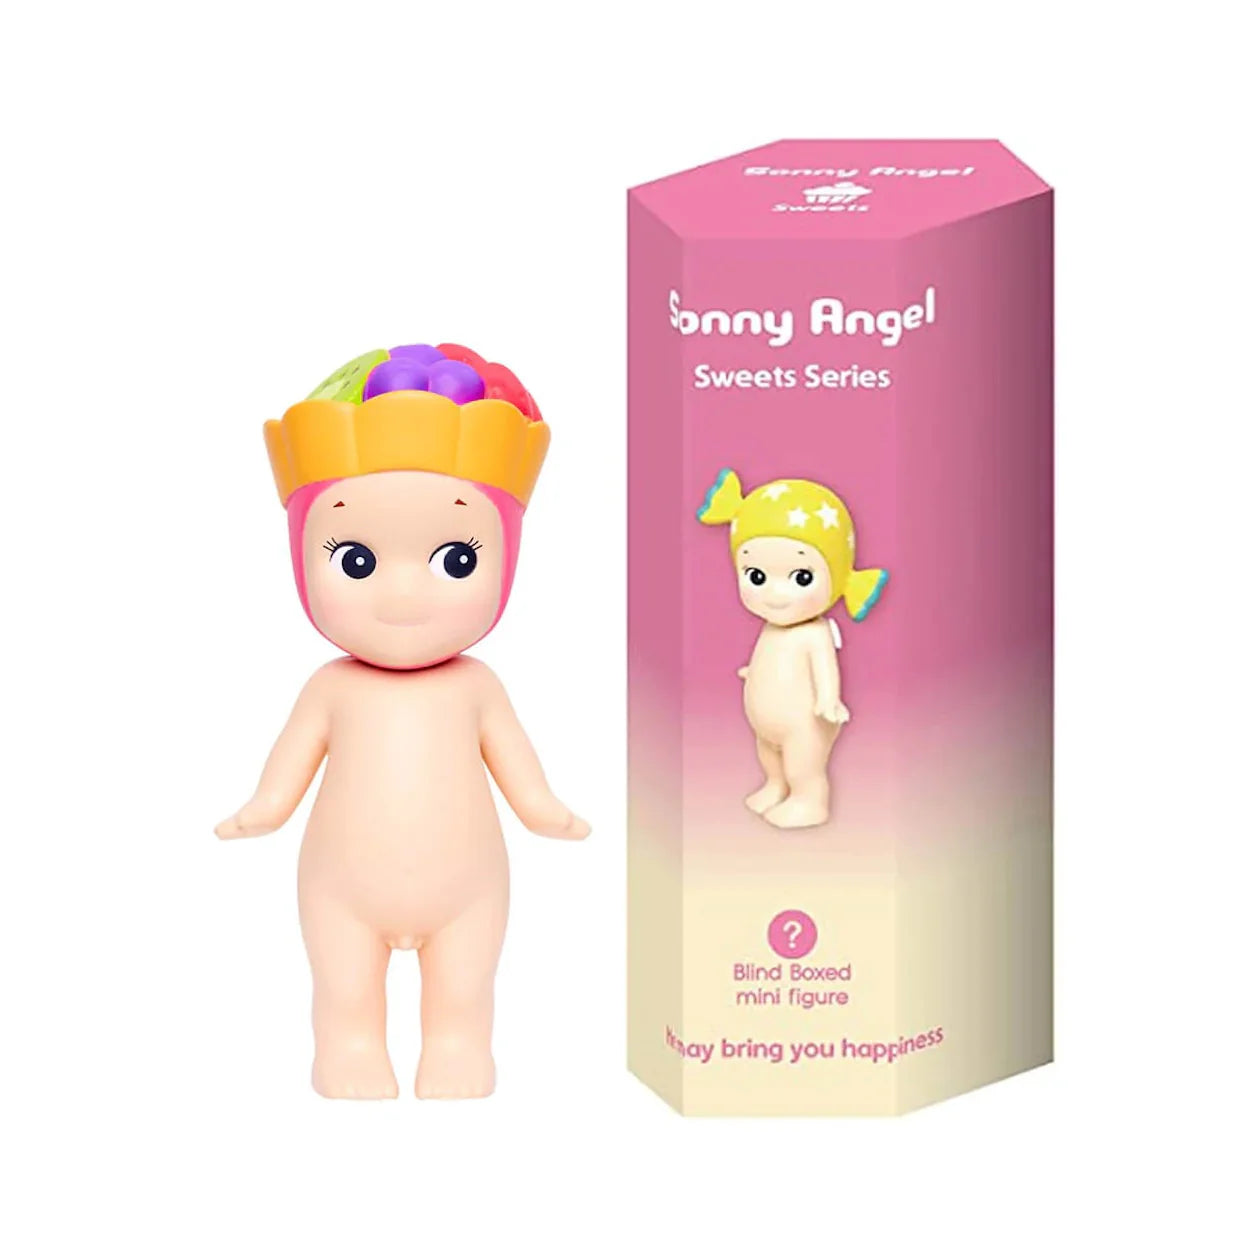 Sonny Angel | Sweets Series - TREEHOUSE kid and craft